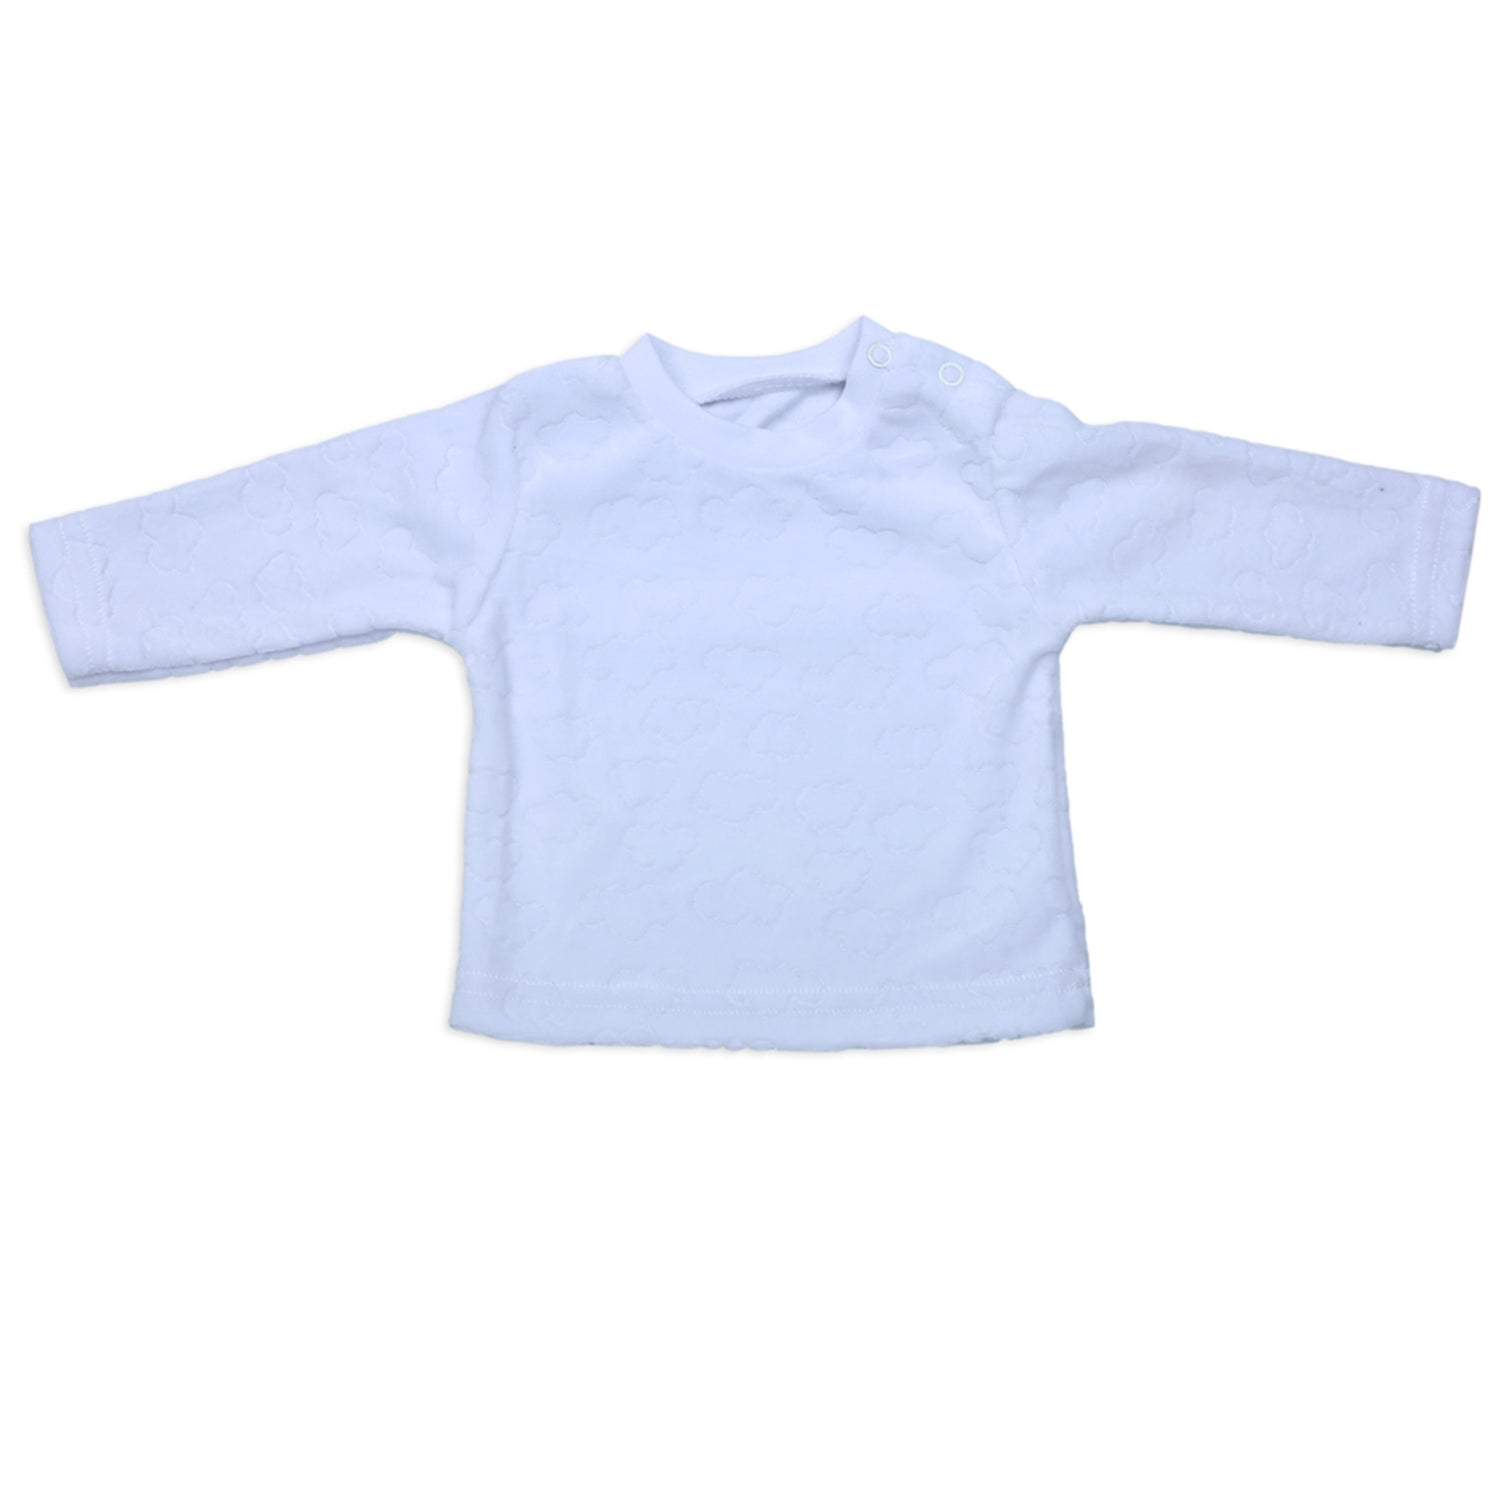 Cuddly Bear Infant 2 Piece Full Sleeves Tshirt And Romper Set - Turquoise